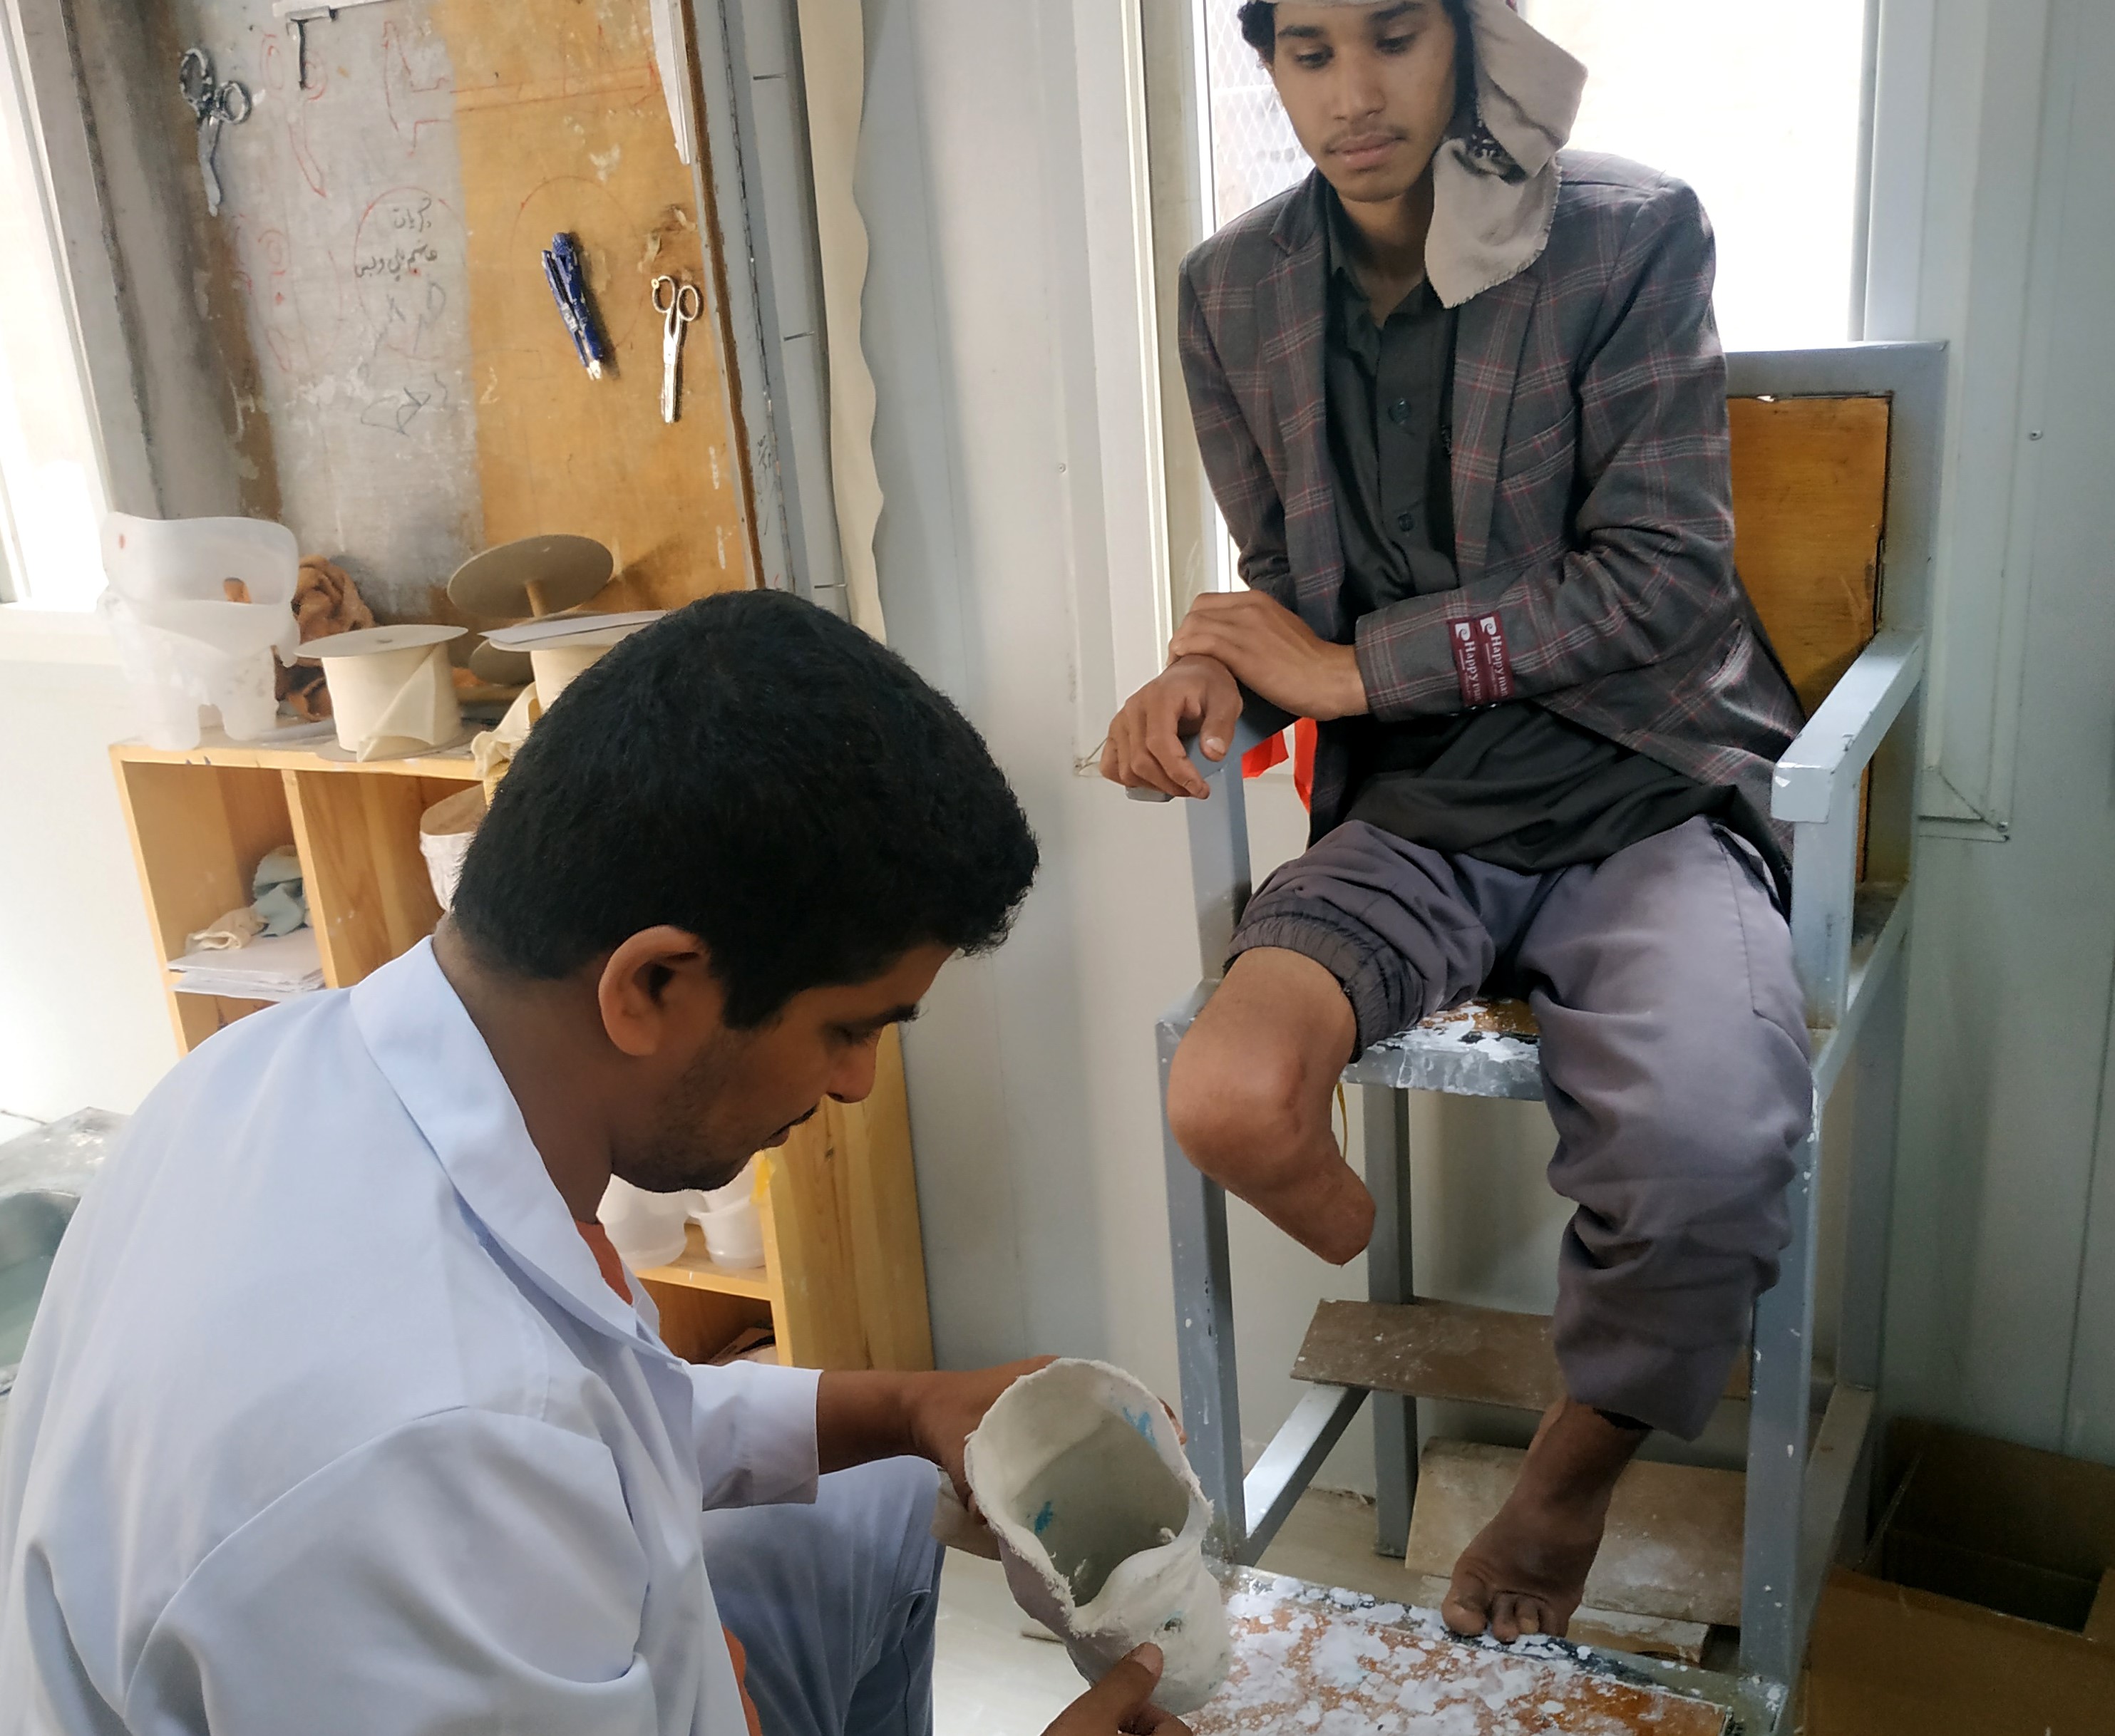 Abdel with an HI physiotherapist for the follow-up of his prosthesis